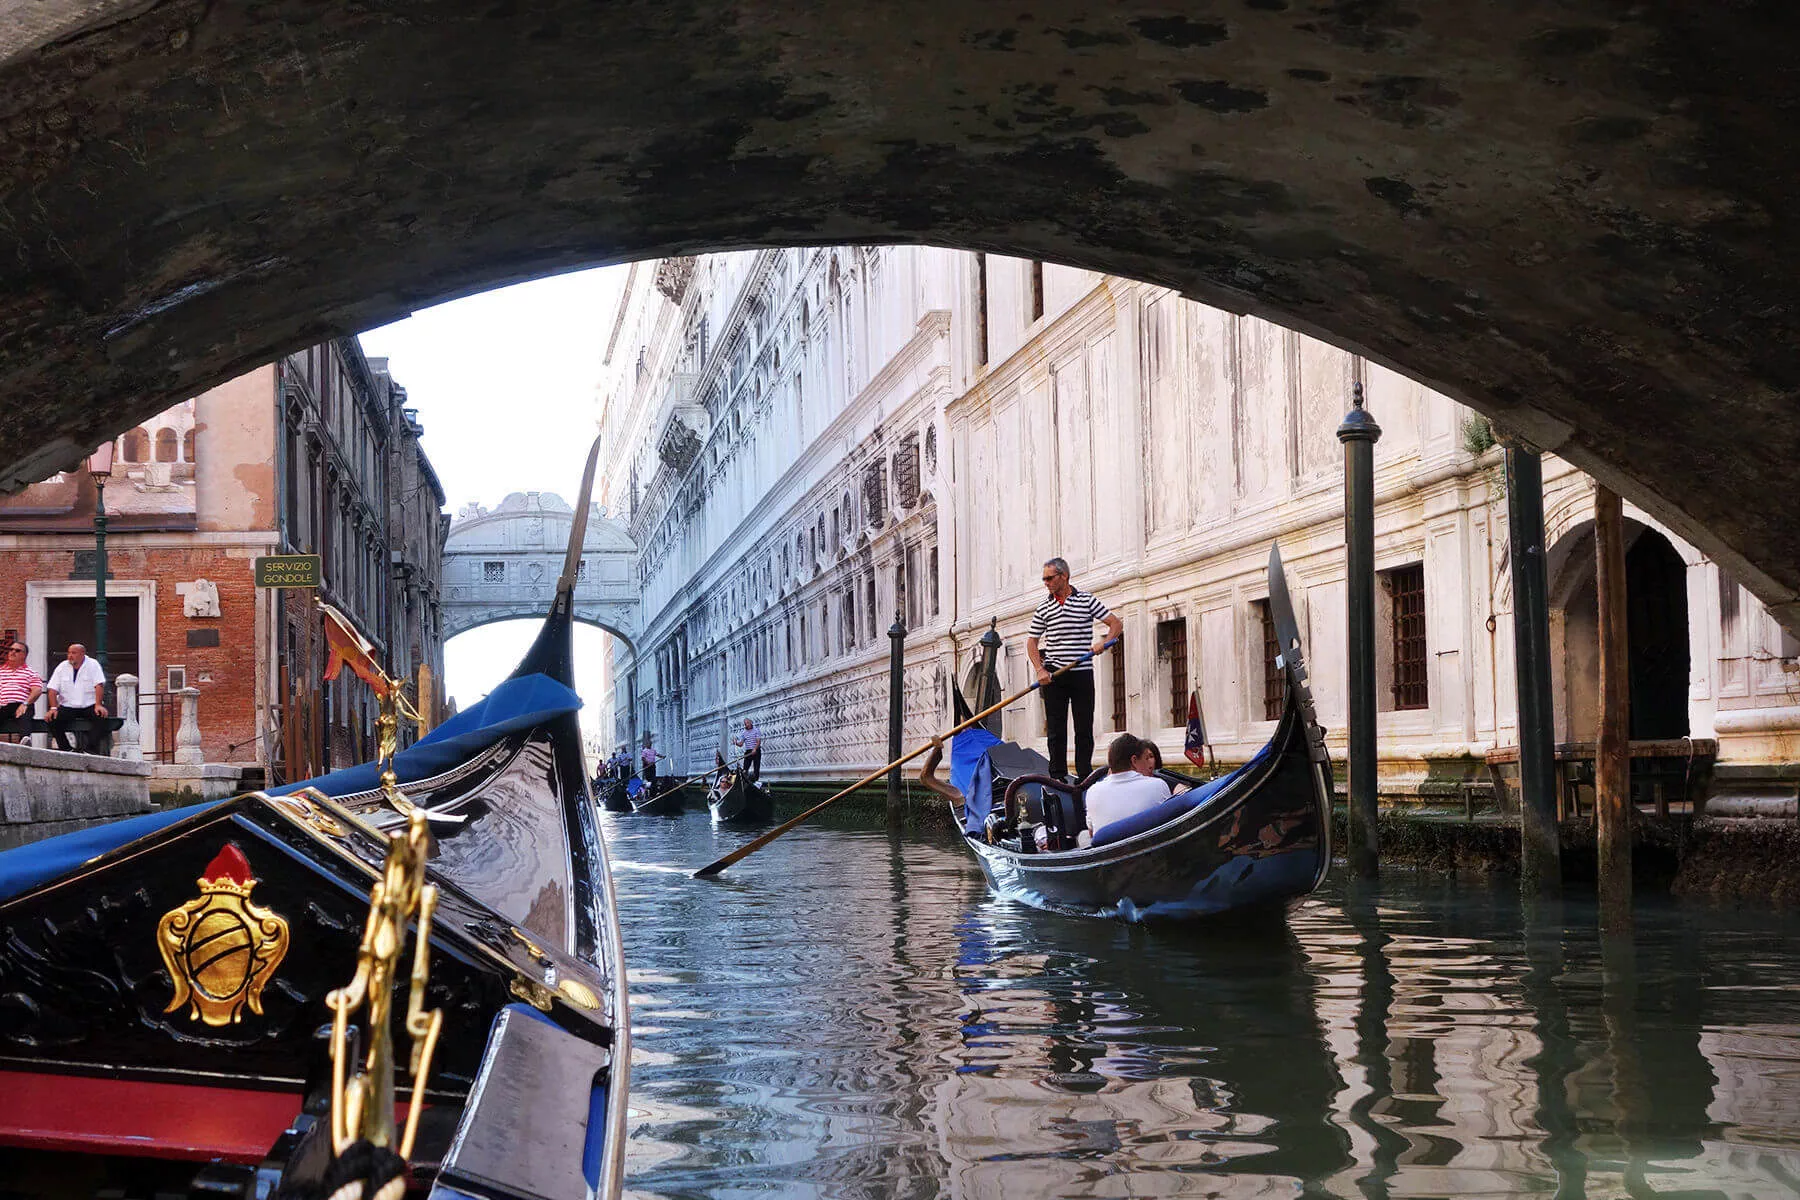 Splurging on a gondola ride in Venice buys you a memory for a lifetime